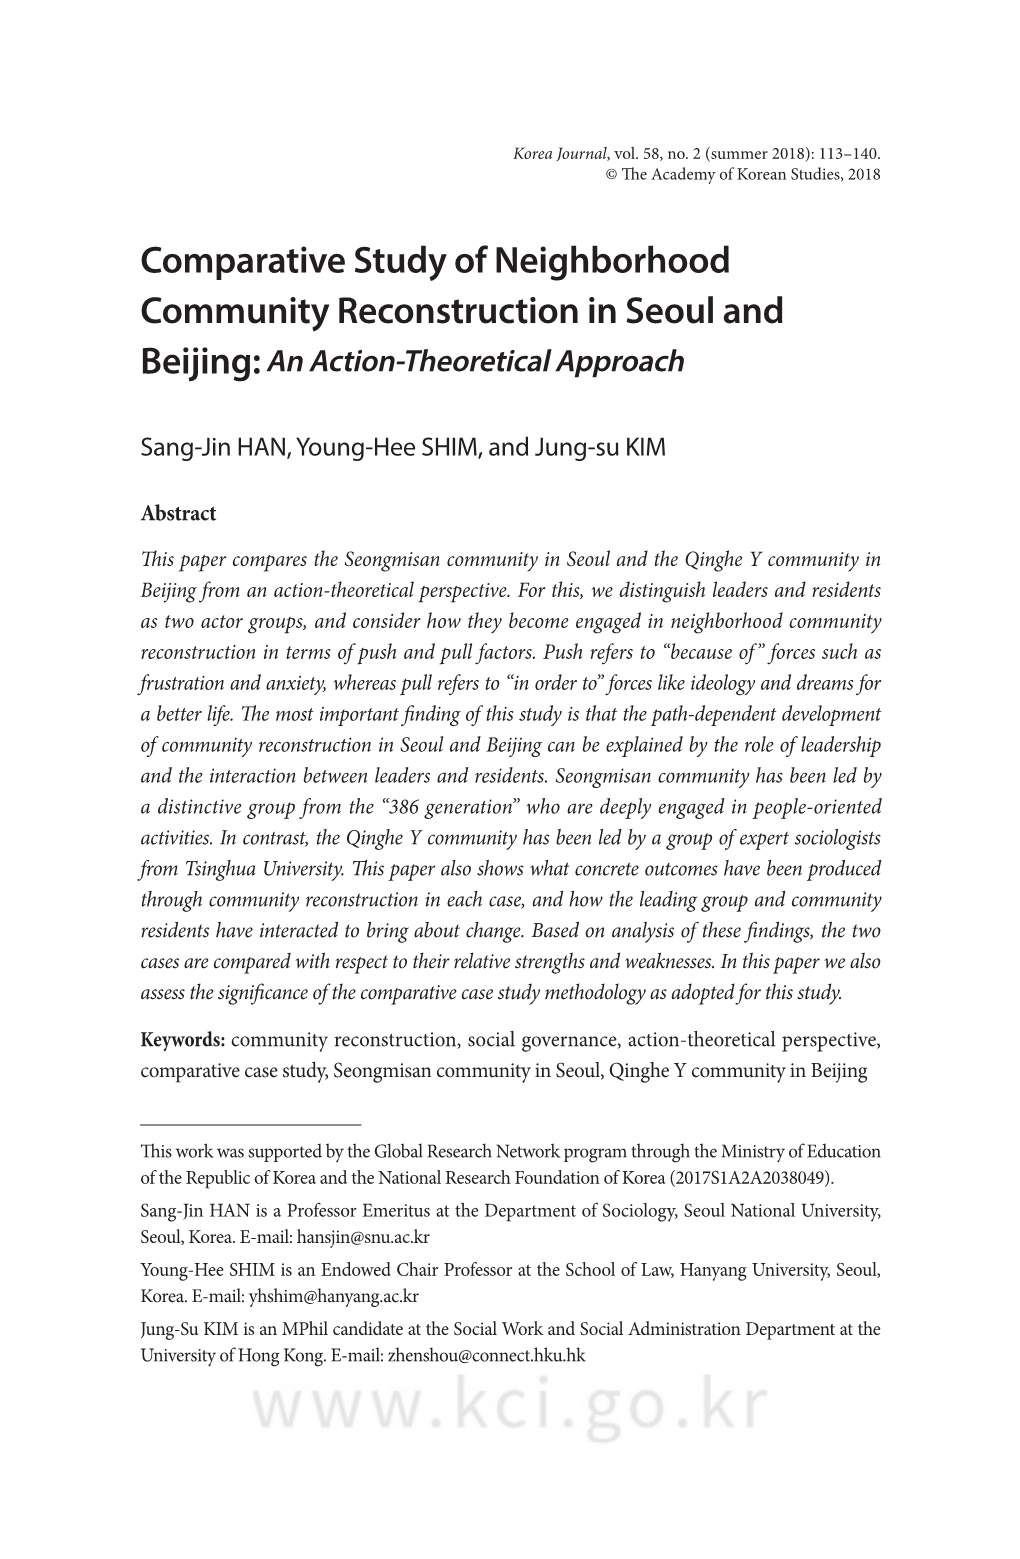 Comparative Study of Neighborhood Community Reconstruction in Seoul and Beijing: an Action-Theoretical Approach